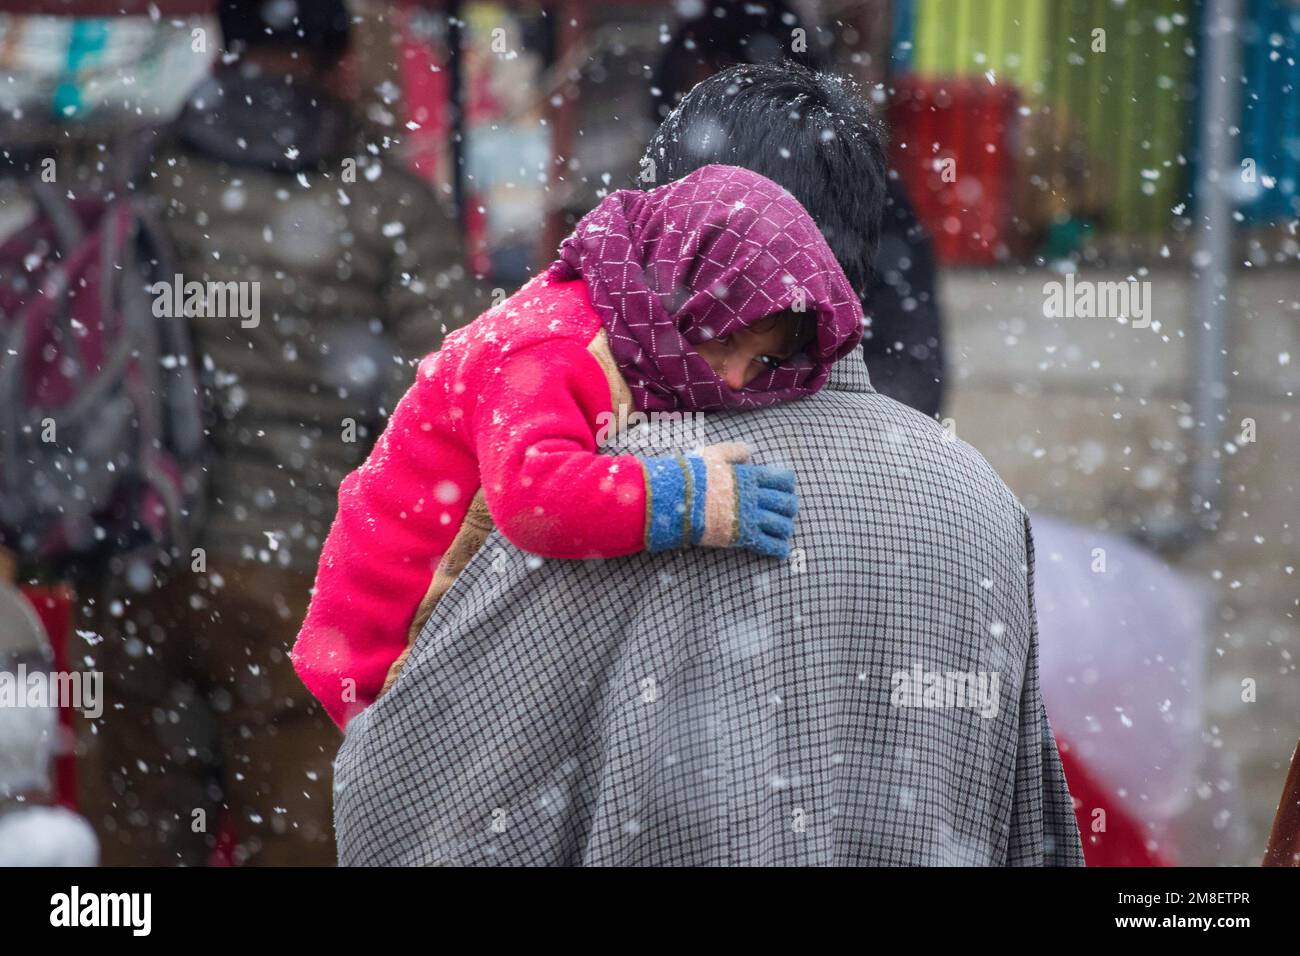 A Kashmiri man carries his child as he walks through a street amid ongoing heavy snowfall on the outskirts of Srinagar. At least two labourers killed on Thursday after an avalanche hits high-altitude area in central Kashmir's Sonamarg. Most parts of Kashmir received fresh snowfall that leading to the closure of Kashmir capital's main highway that connects disputed region with the rest of India. Meanwhile airport authorities suspended all flight operations till further notice due to continuous snowfall and low visibility. Stock Photo